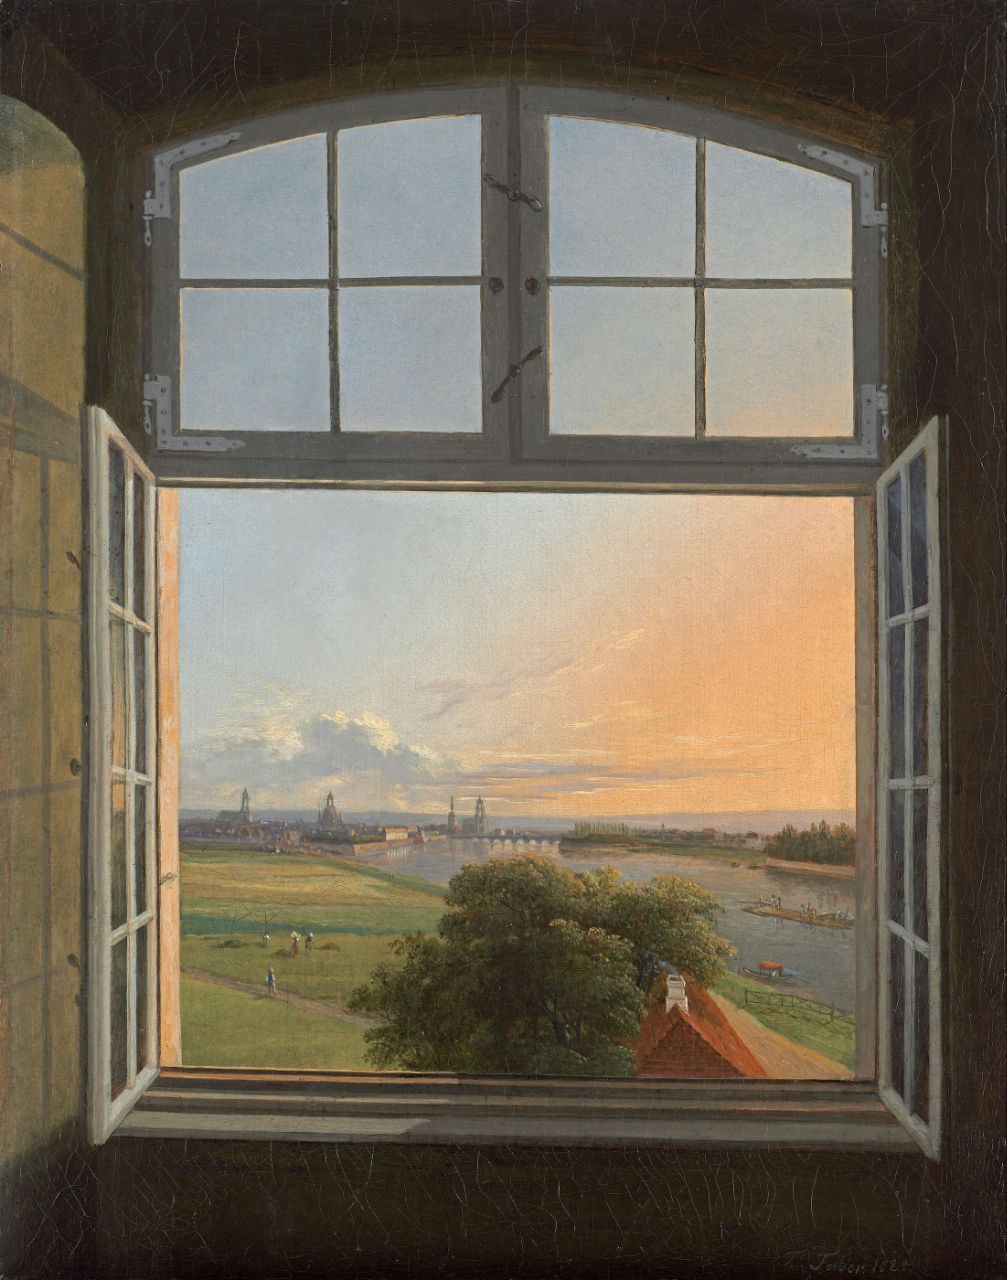 A View of Dresden by Traugott Faber, details of the painting, 1824.